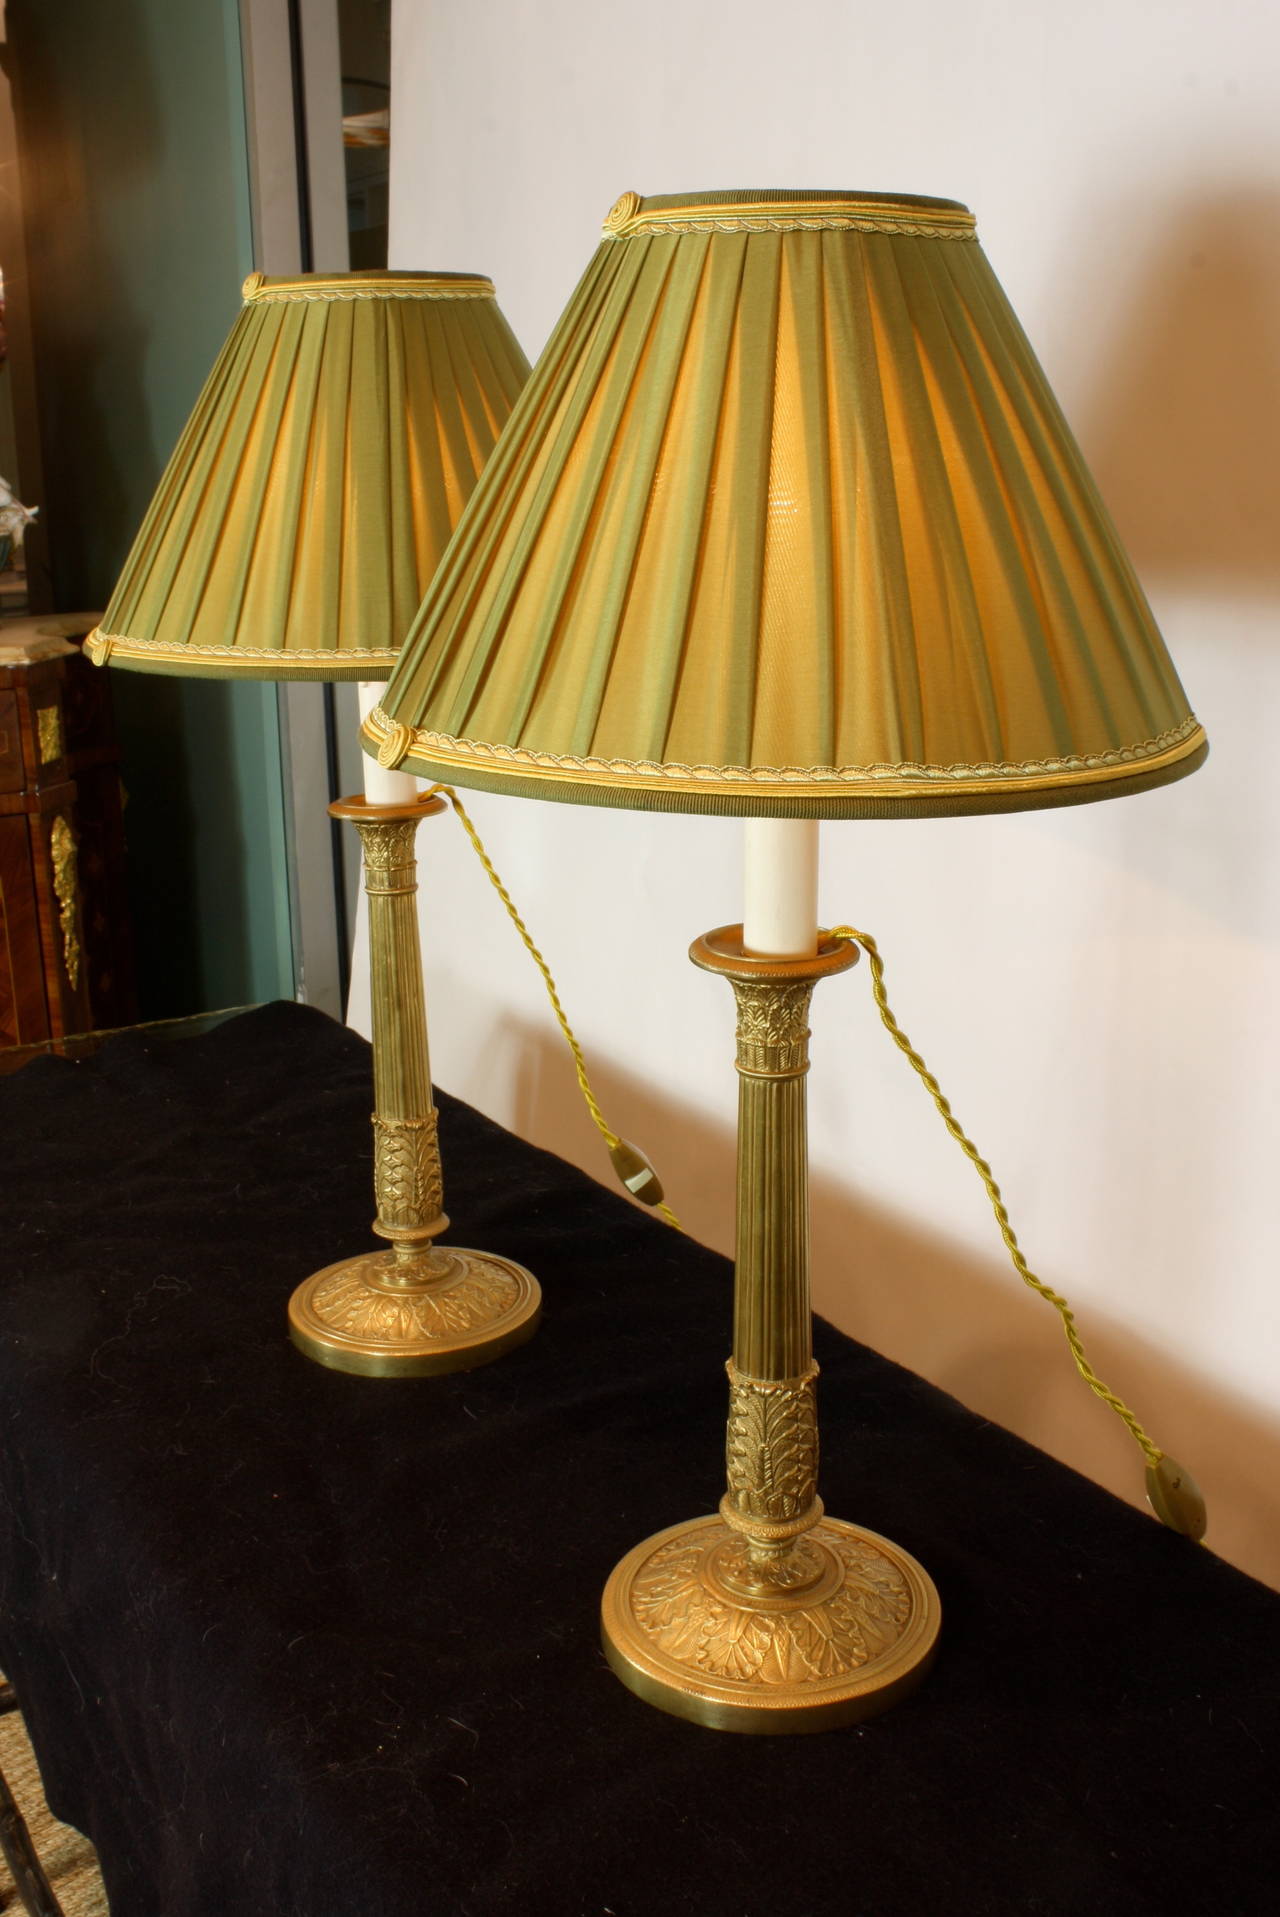 Pair of large French gilt-bronze Empire style candlesticks with finely-chased neoclassical detailing (Circa 1870), converted to lamps, with custom-made Paris silk pleated shades (12